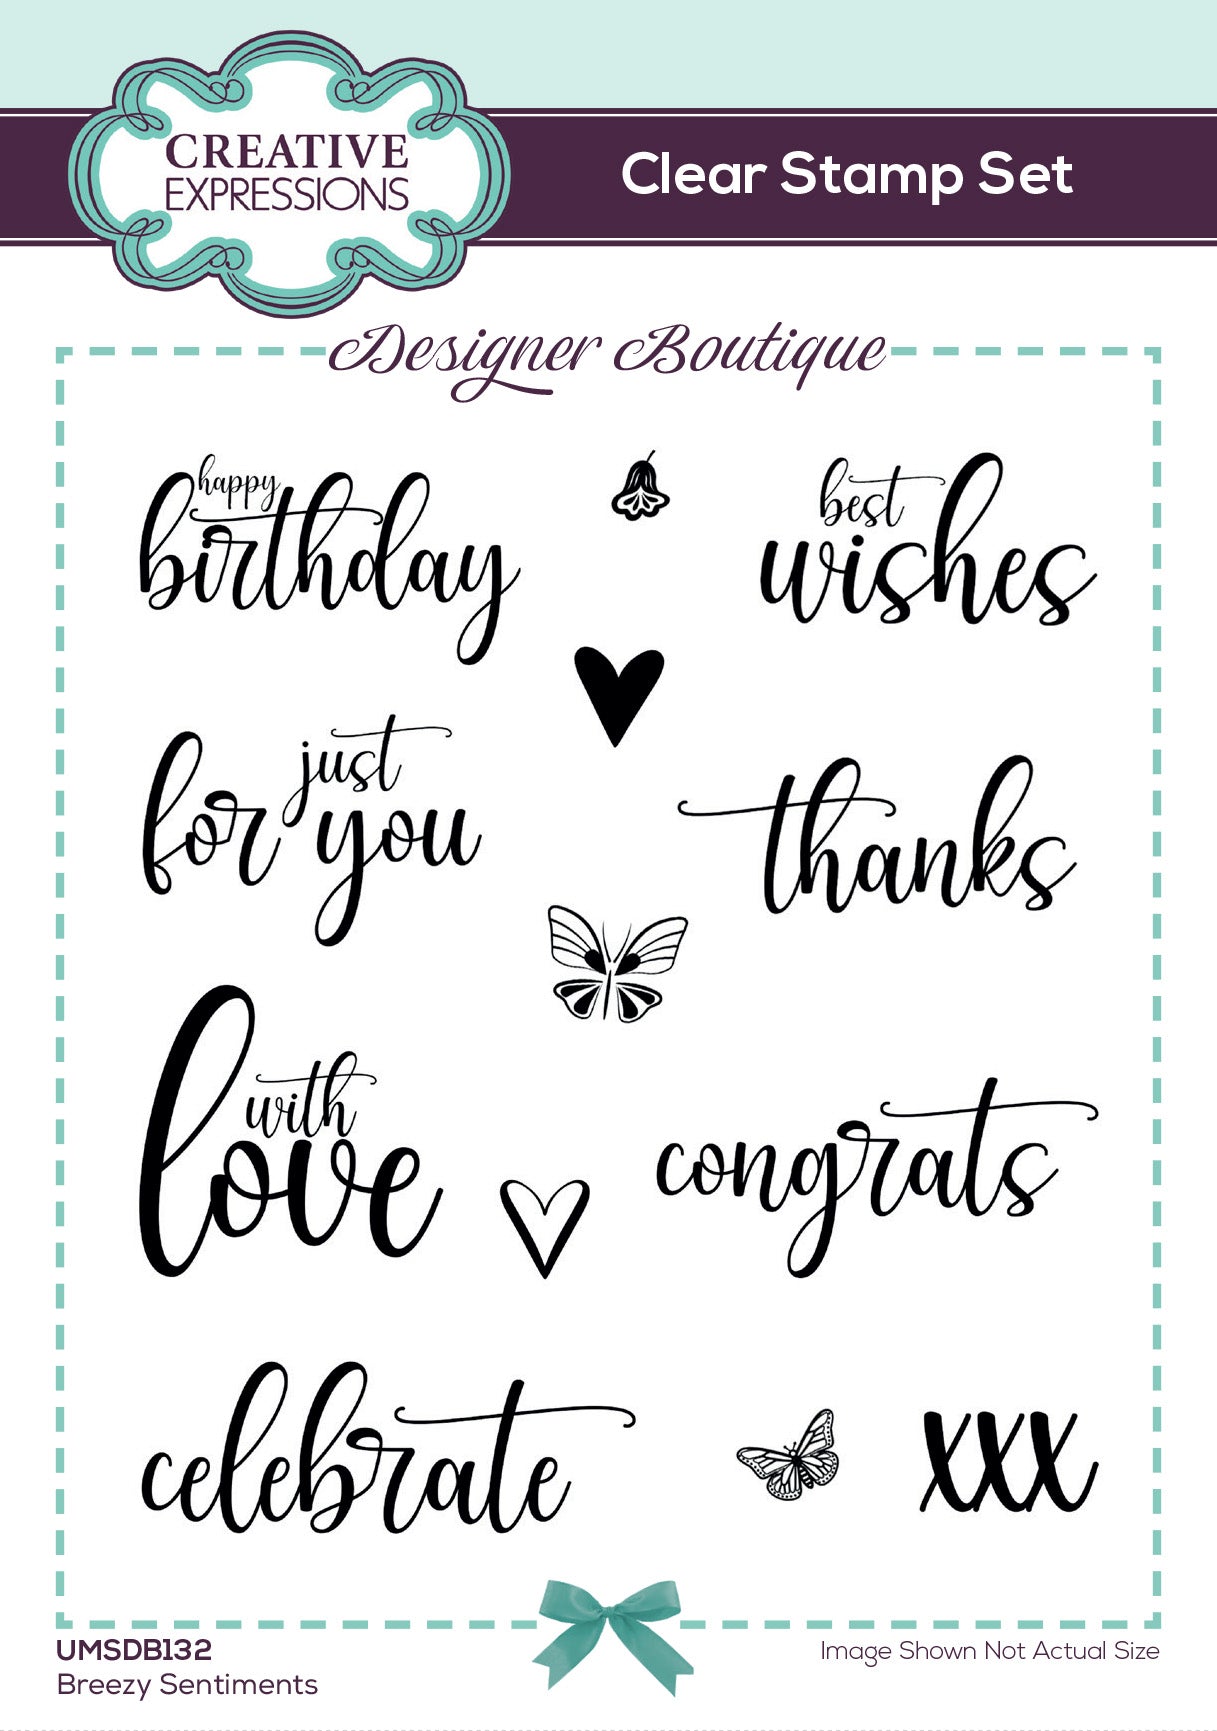 Creative Expressions Designer Boutique Breezy Sentiments 6 in x 4 in Clear Stamp Set